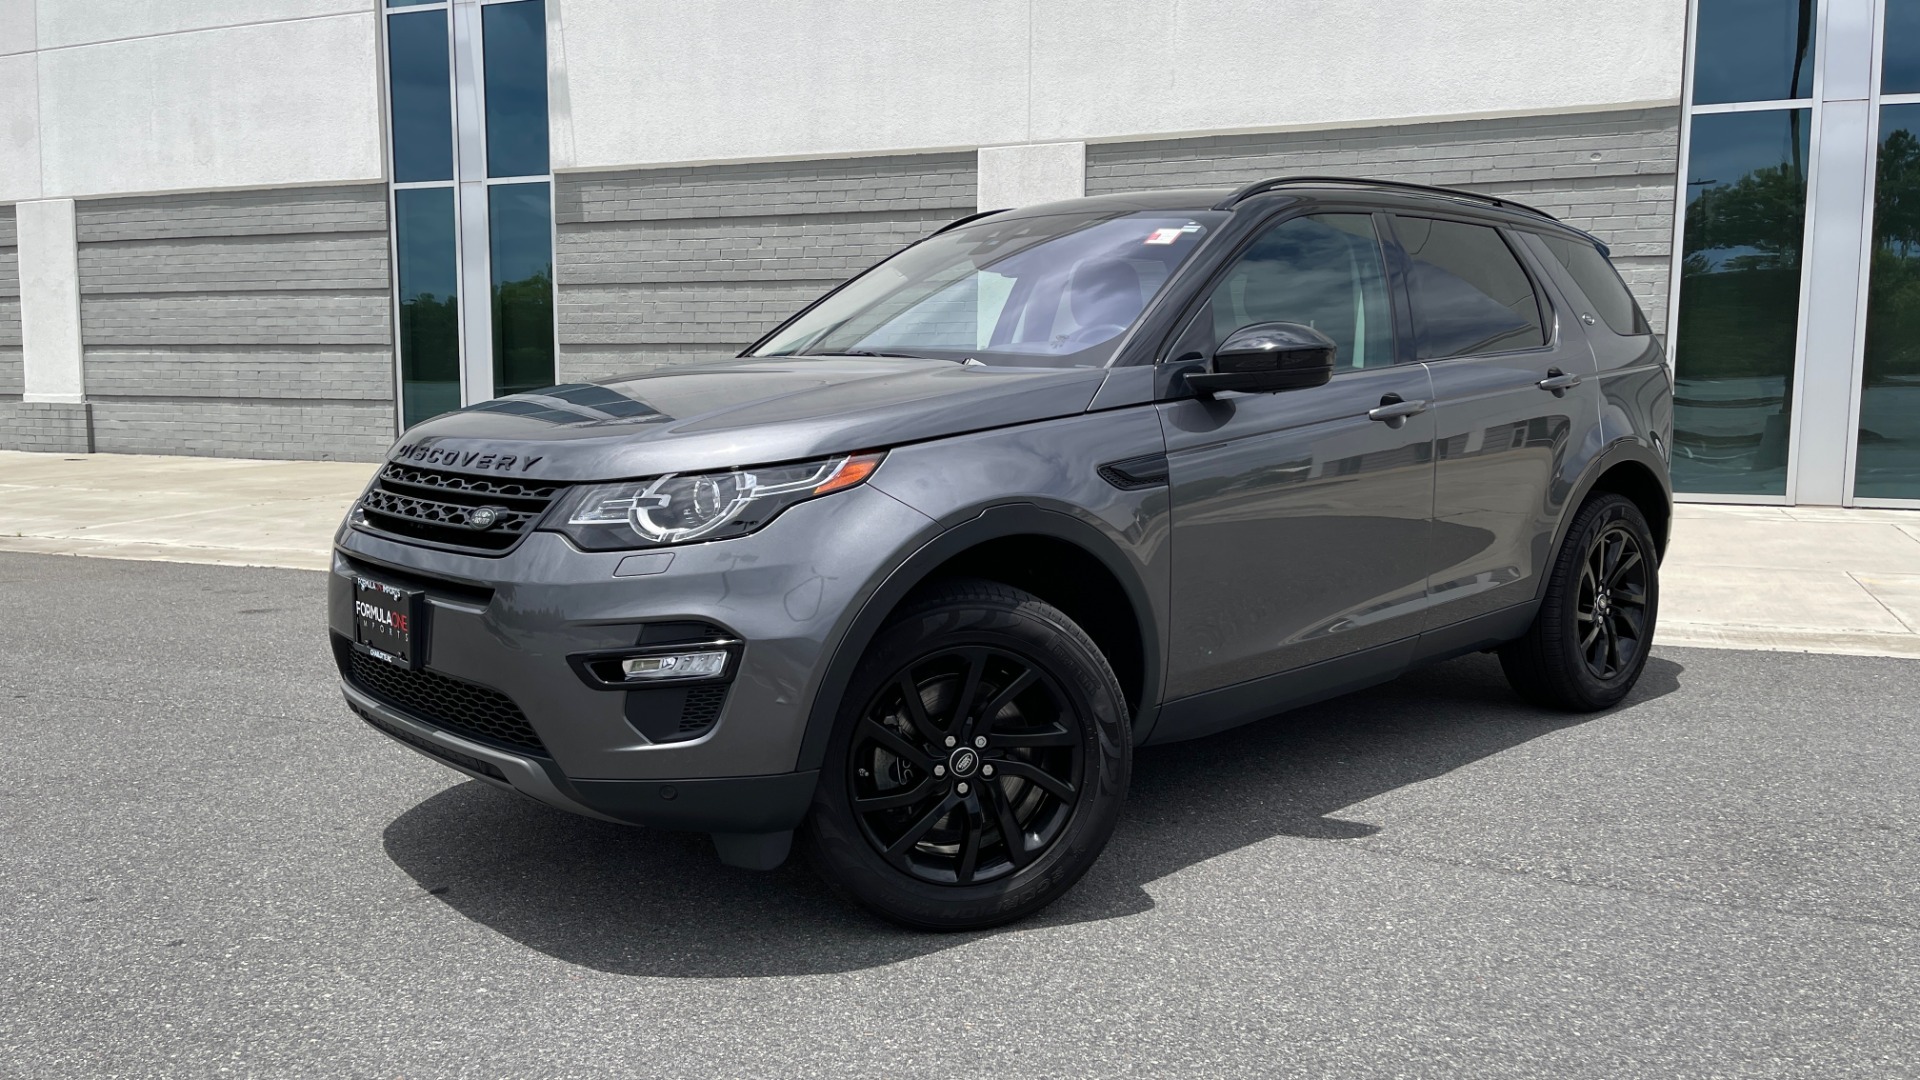 Used 2018 Land Rover DISCOVERY SPORT HSE 4WD / NAV / PANO-ROOF / MERIDIAN SND / HTD STS / LANE ASST / REARVIEW for sale Sold at Formula Imports in Charlotte NC 28227 1